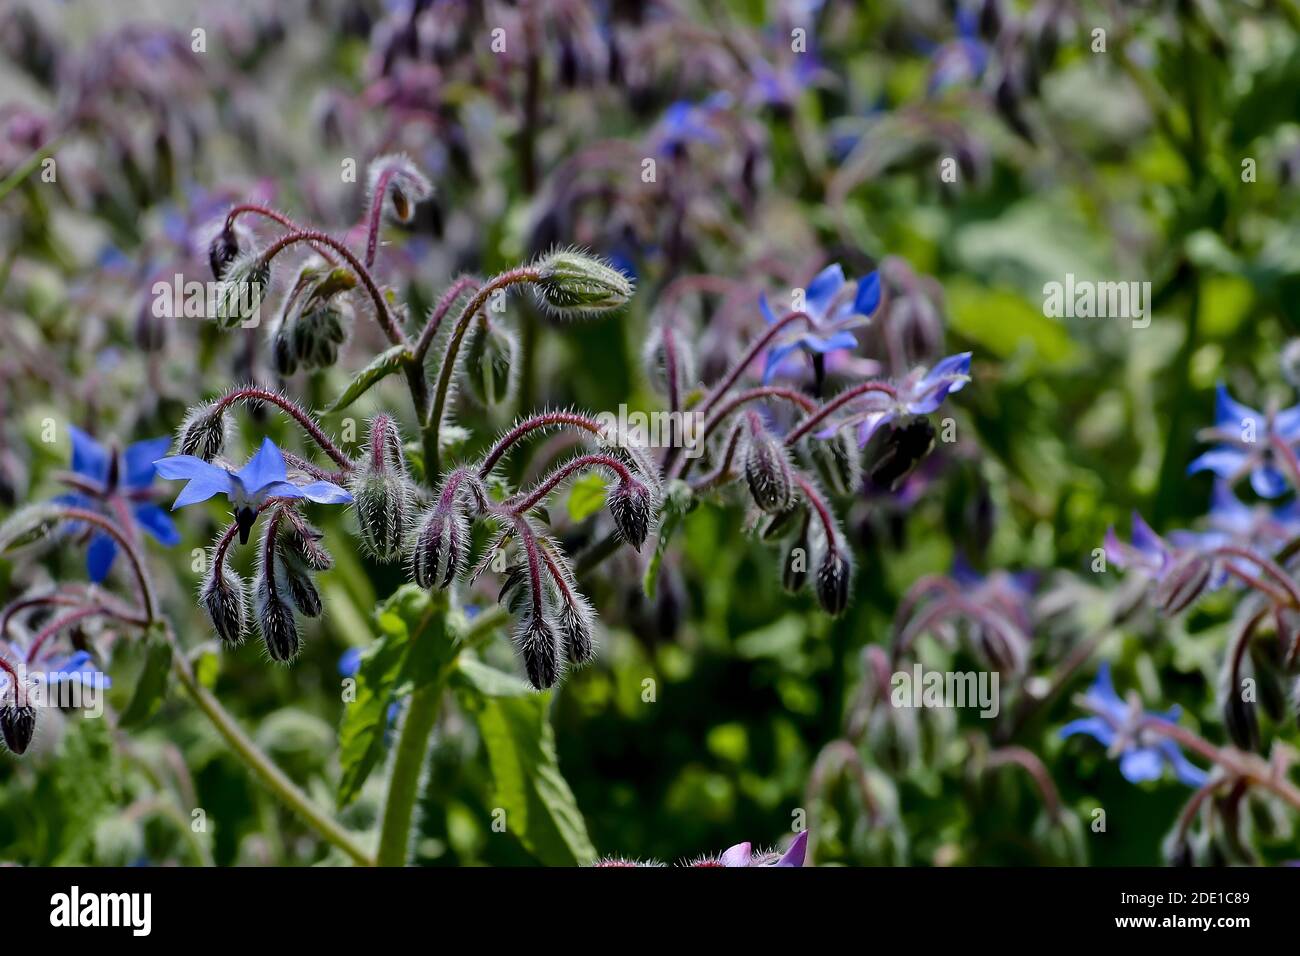 Flowers and buds of Starflower, Borage or Bee bread, Borago officinalis, in summer, Bavaria, Germany Stock Photo